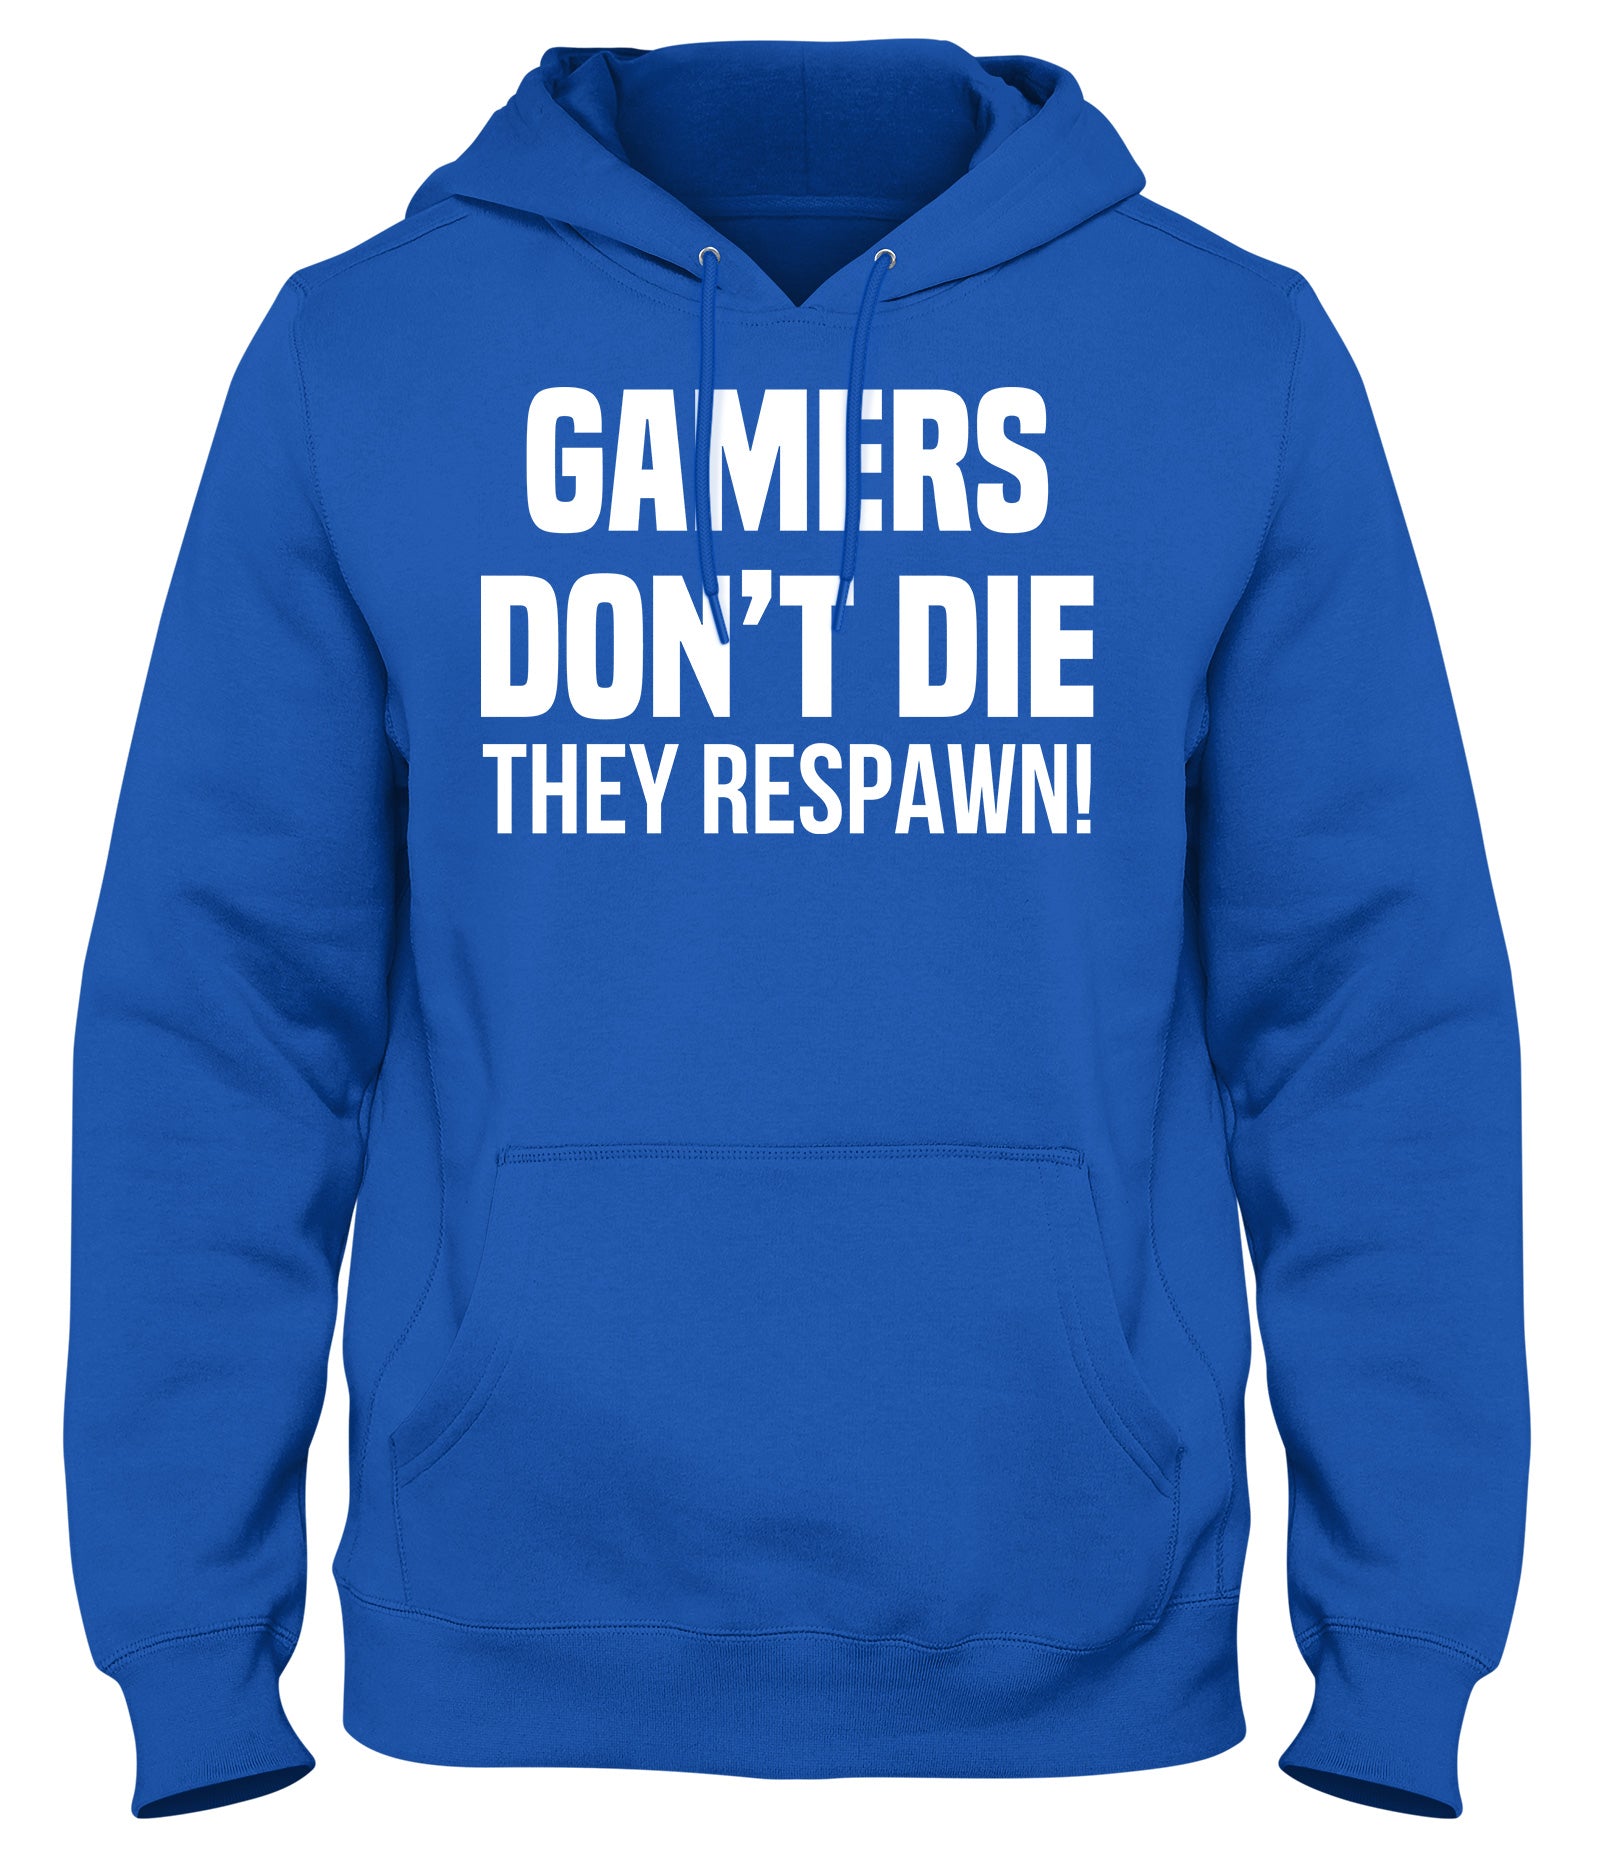 GAMERS DON'T DIE THEY RESPAWN MENS WOMENS UNISEX FUNNY HOODIE